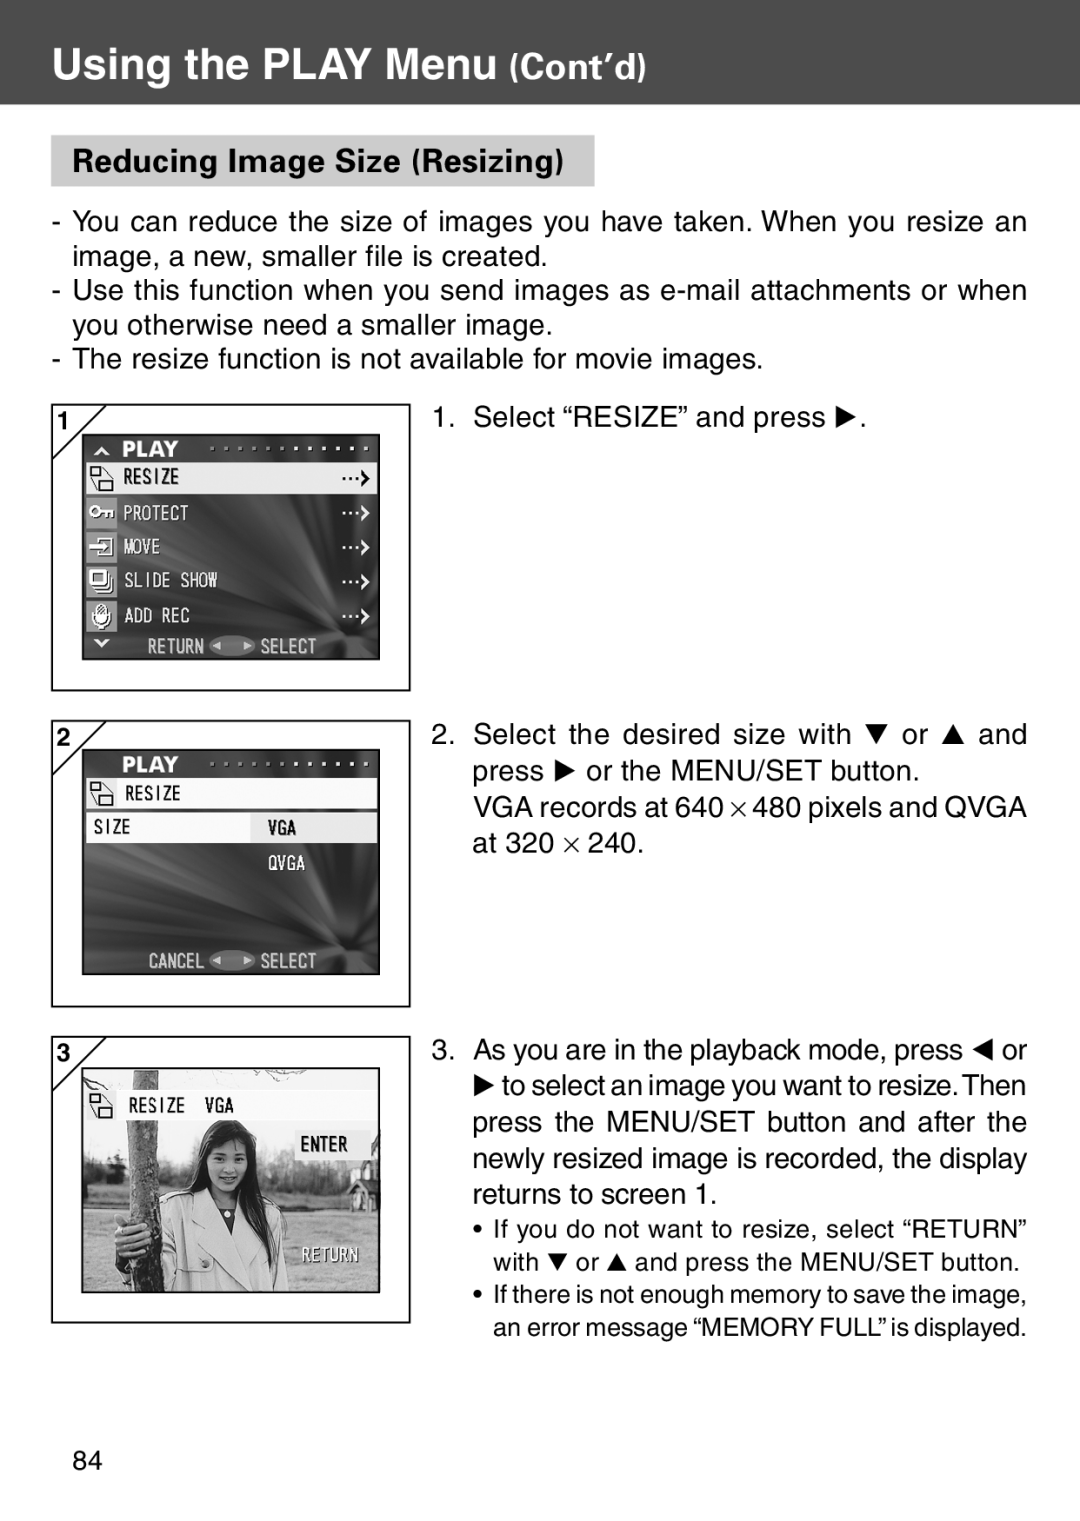 Konica Minolta KD-500Z user manual Reducing Image Size Resizing, Using the PLAY Menu Cont’d 